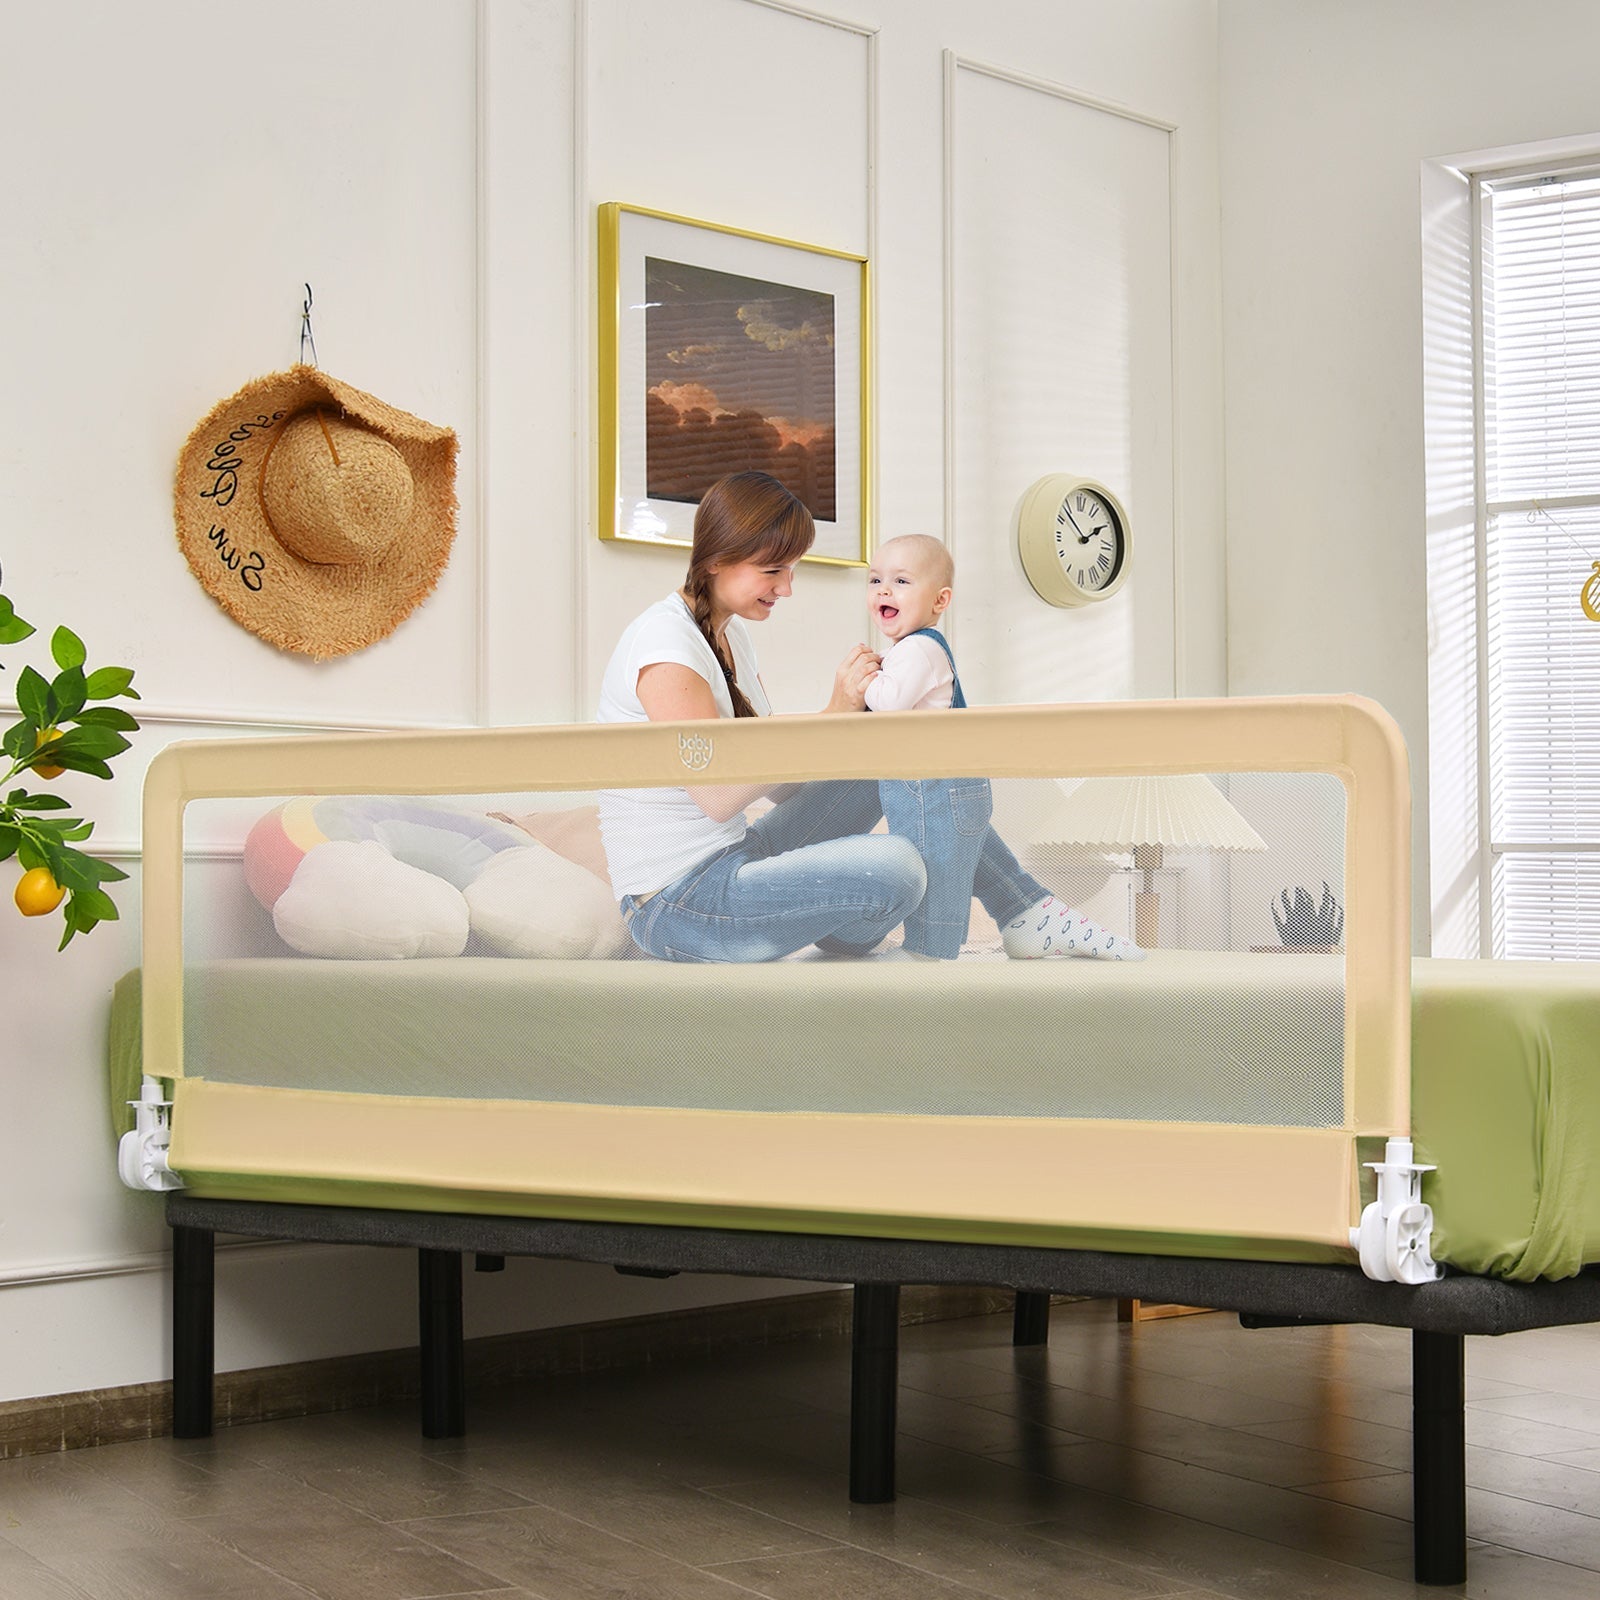 Beige Toddler Bed Rail with Safety Straps - Foldable Mesh, Supportive